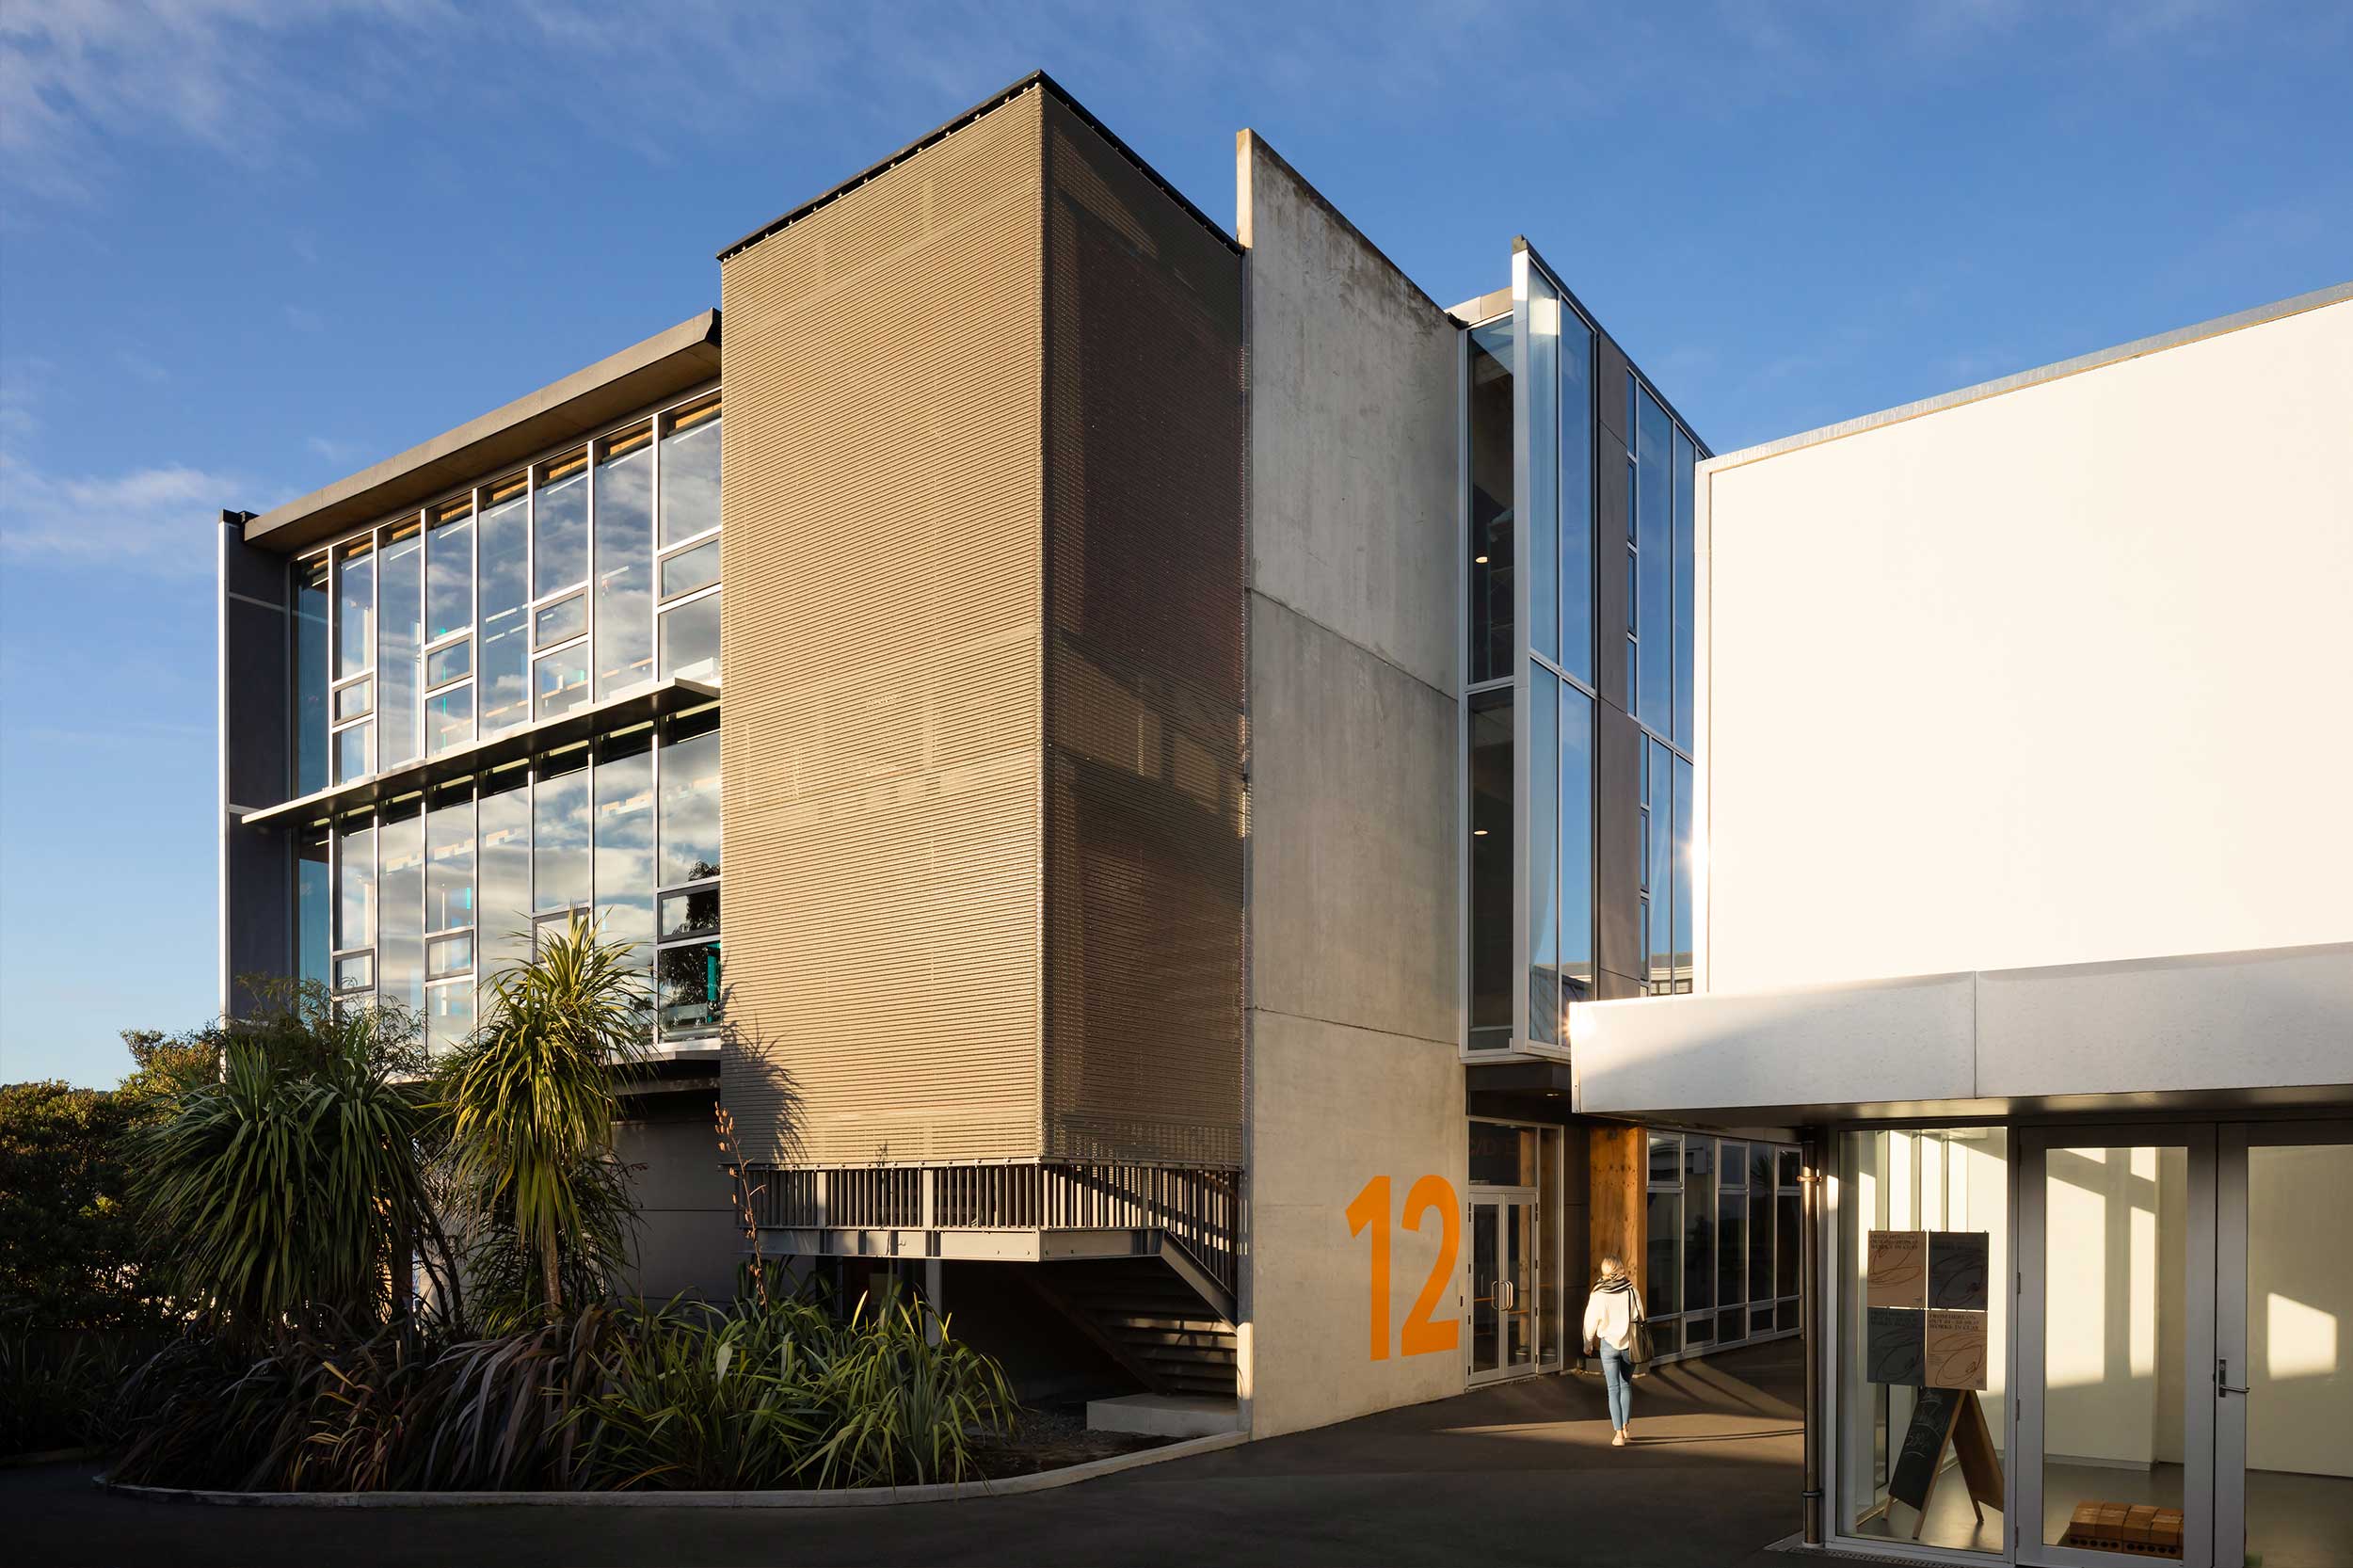 Kaynemaile balustrade for College of Creative Arts at Massey University